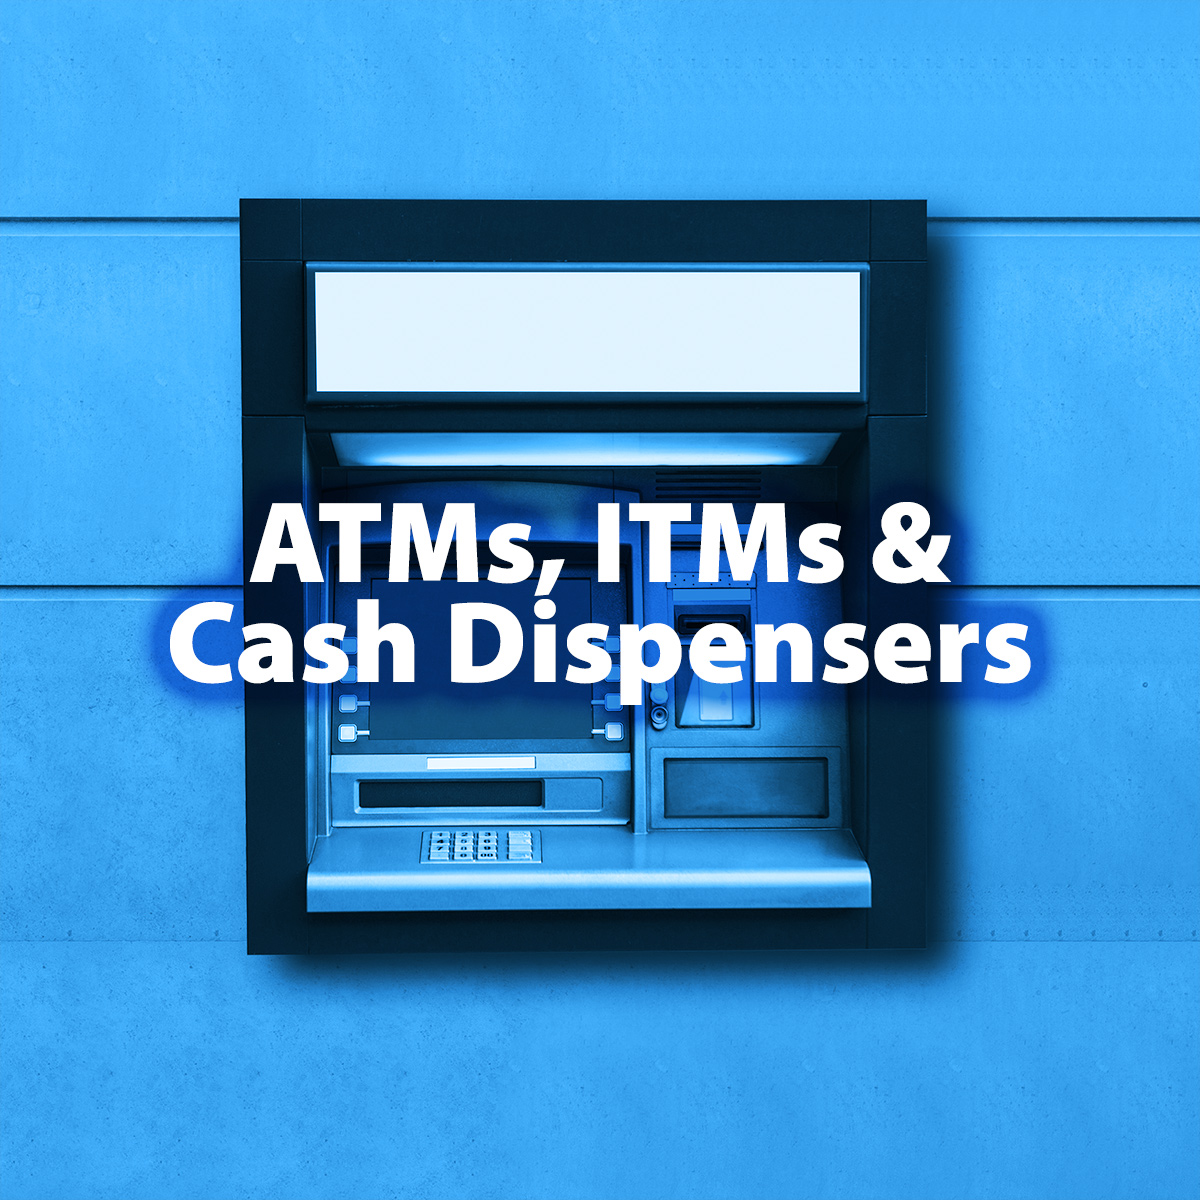 ATMs, ITMs and Cash Dispensers